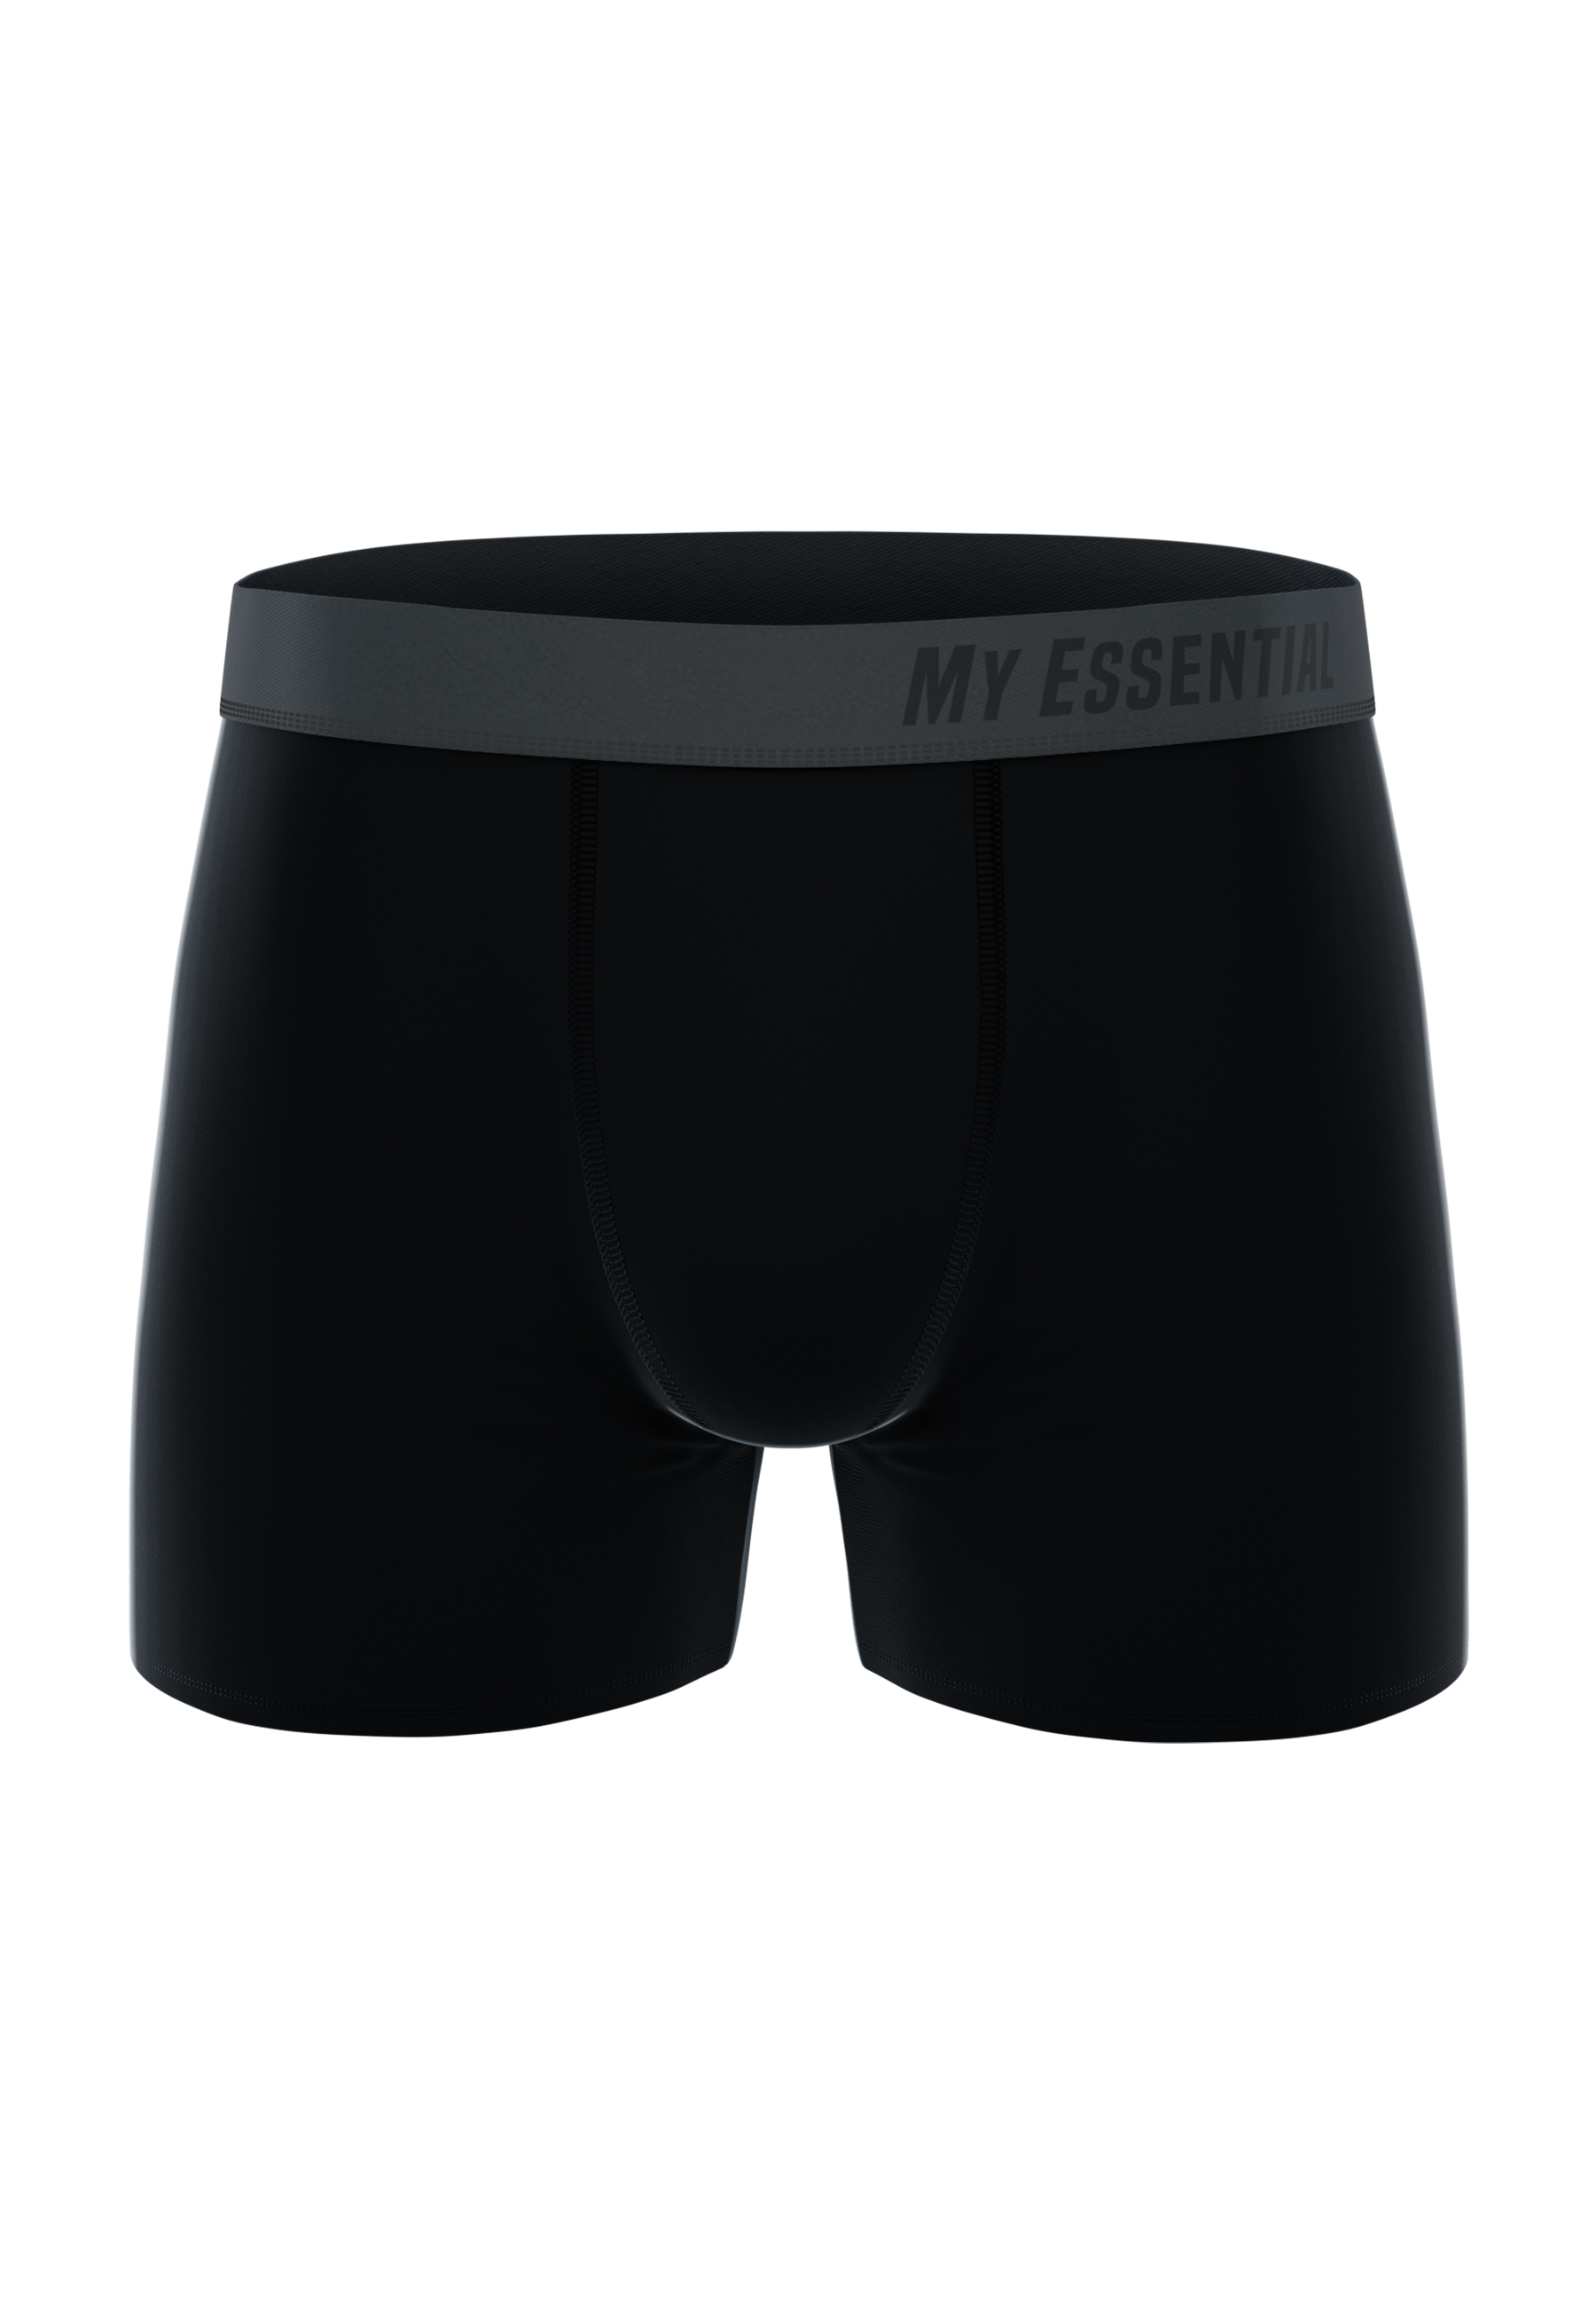 MY ESSENTIAL CLOTHING 3-Pack Boxershorts all black S